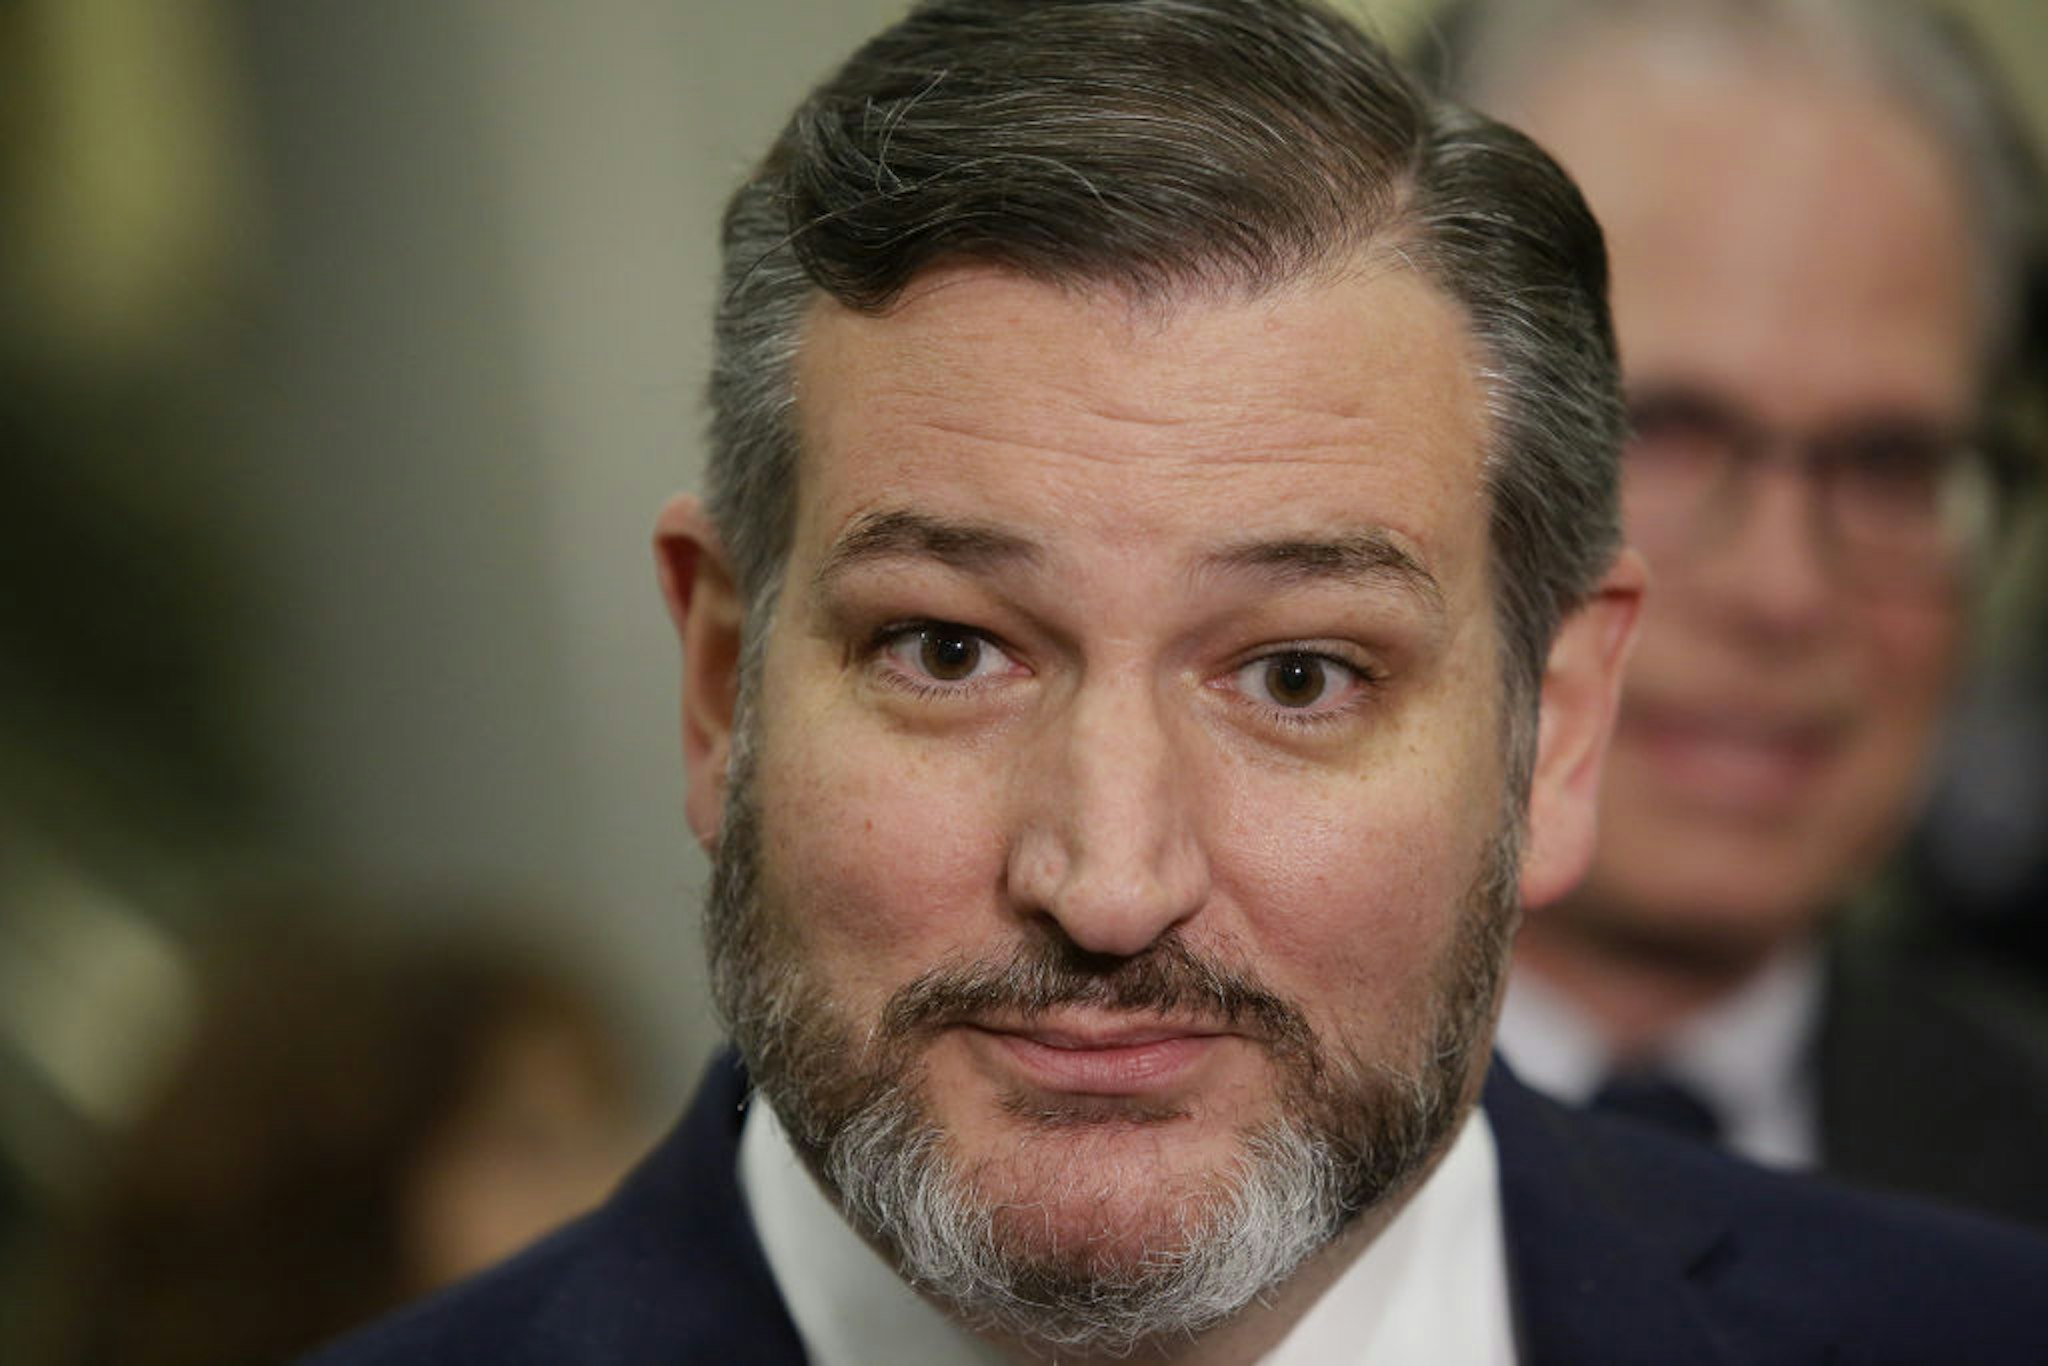 Senator Ted Cruz, a Republican from Texas, reacts as he listens to a question during a news conference in the Senate Subway at the U.S. Capitol in Washington, D.C., U.S., on Monday, Jan. 27, 2020.